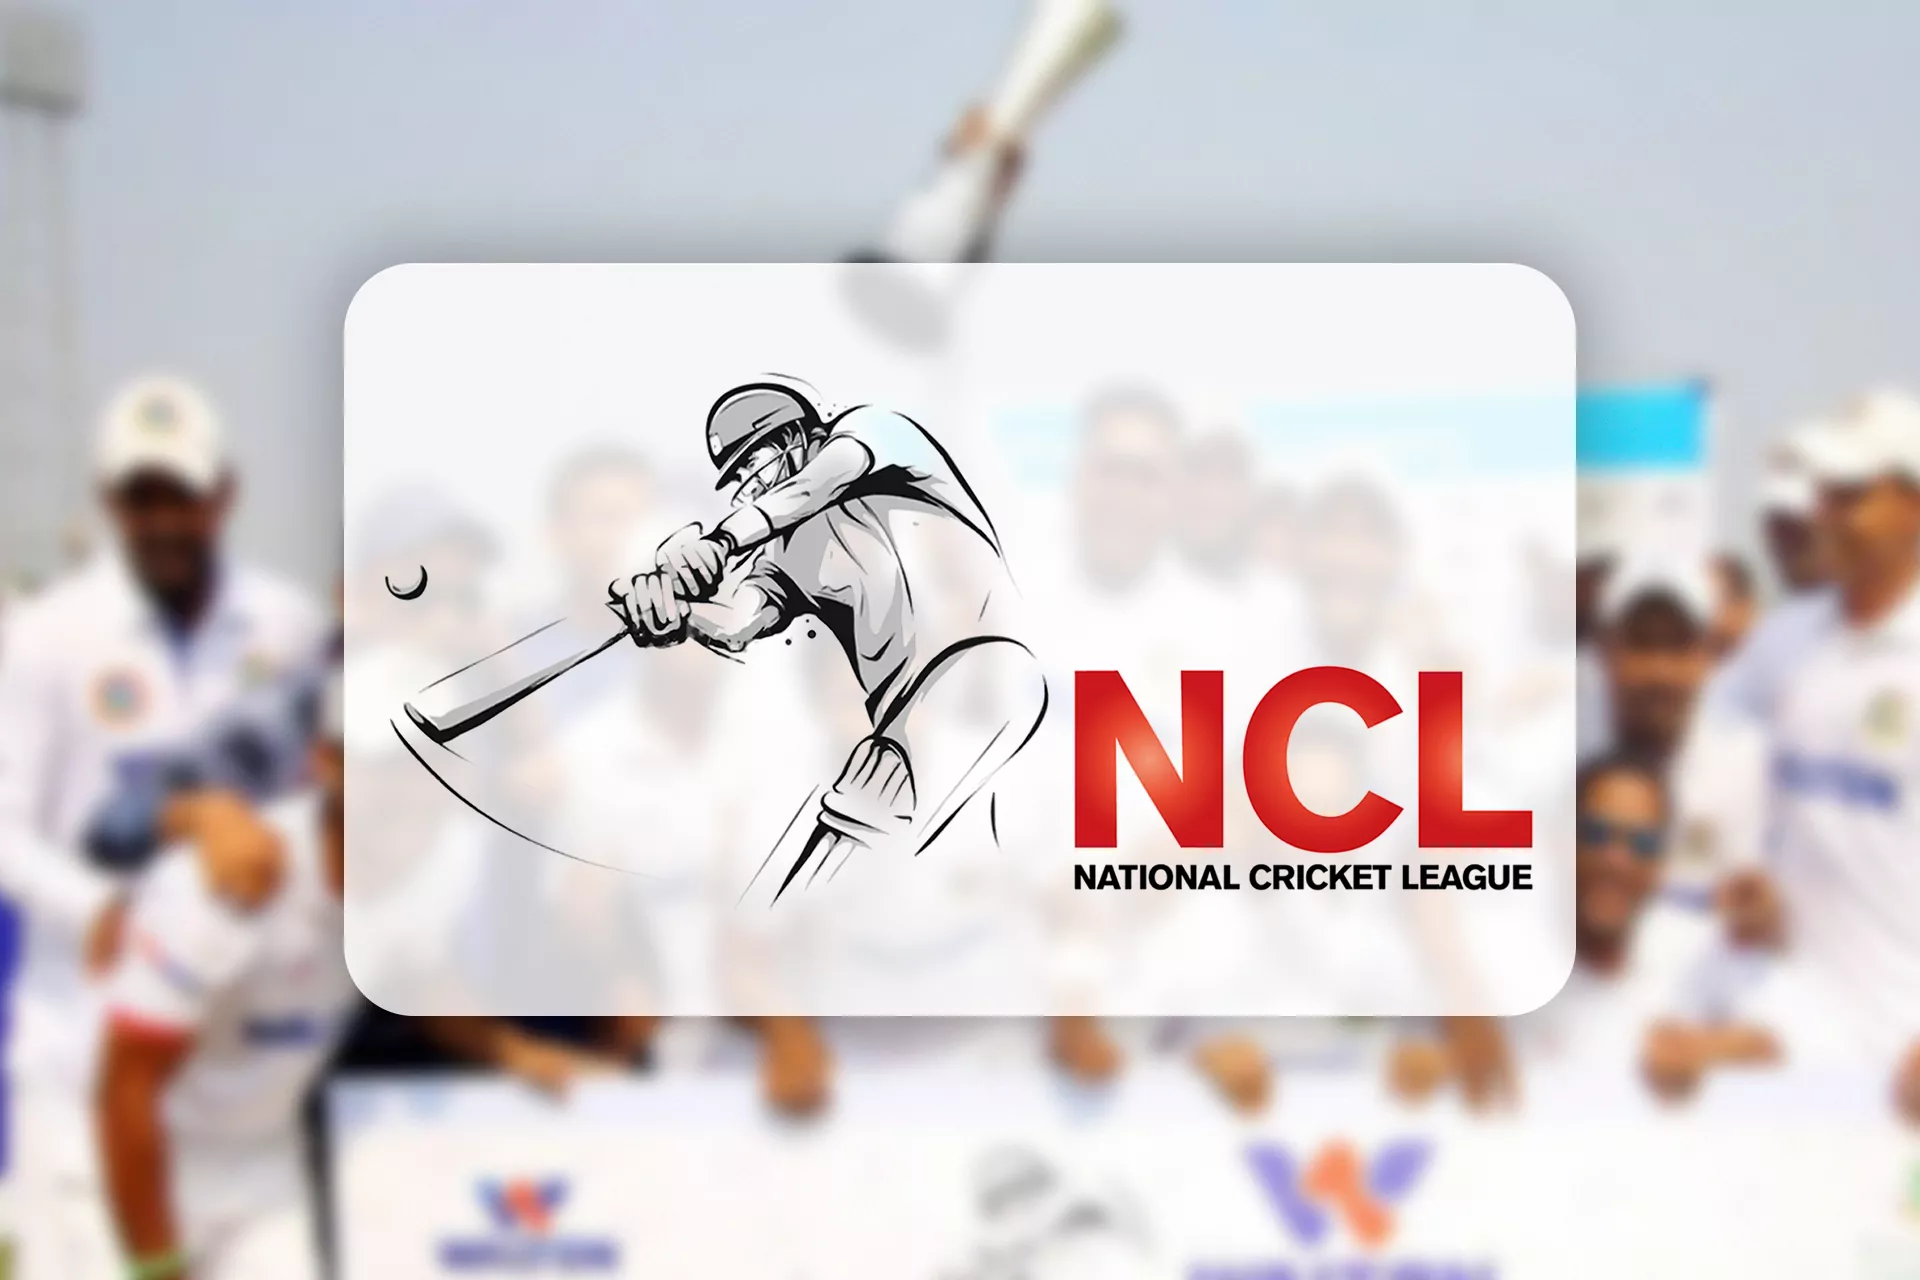 National Cricket League usually lasts for a few months and attracts lots of viewers.